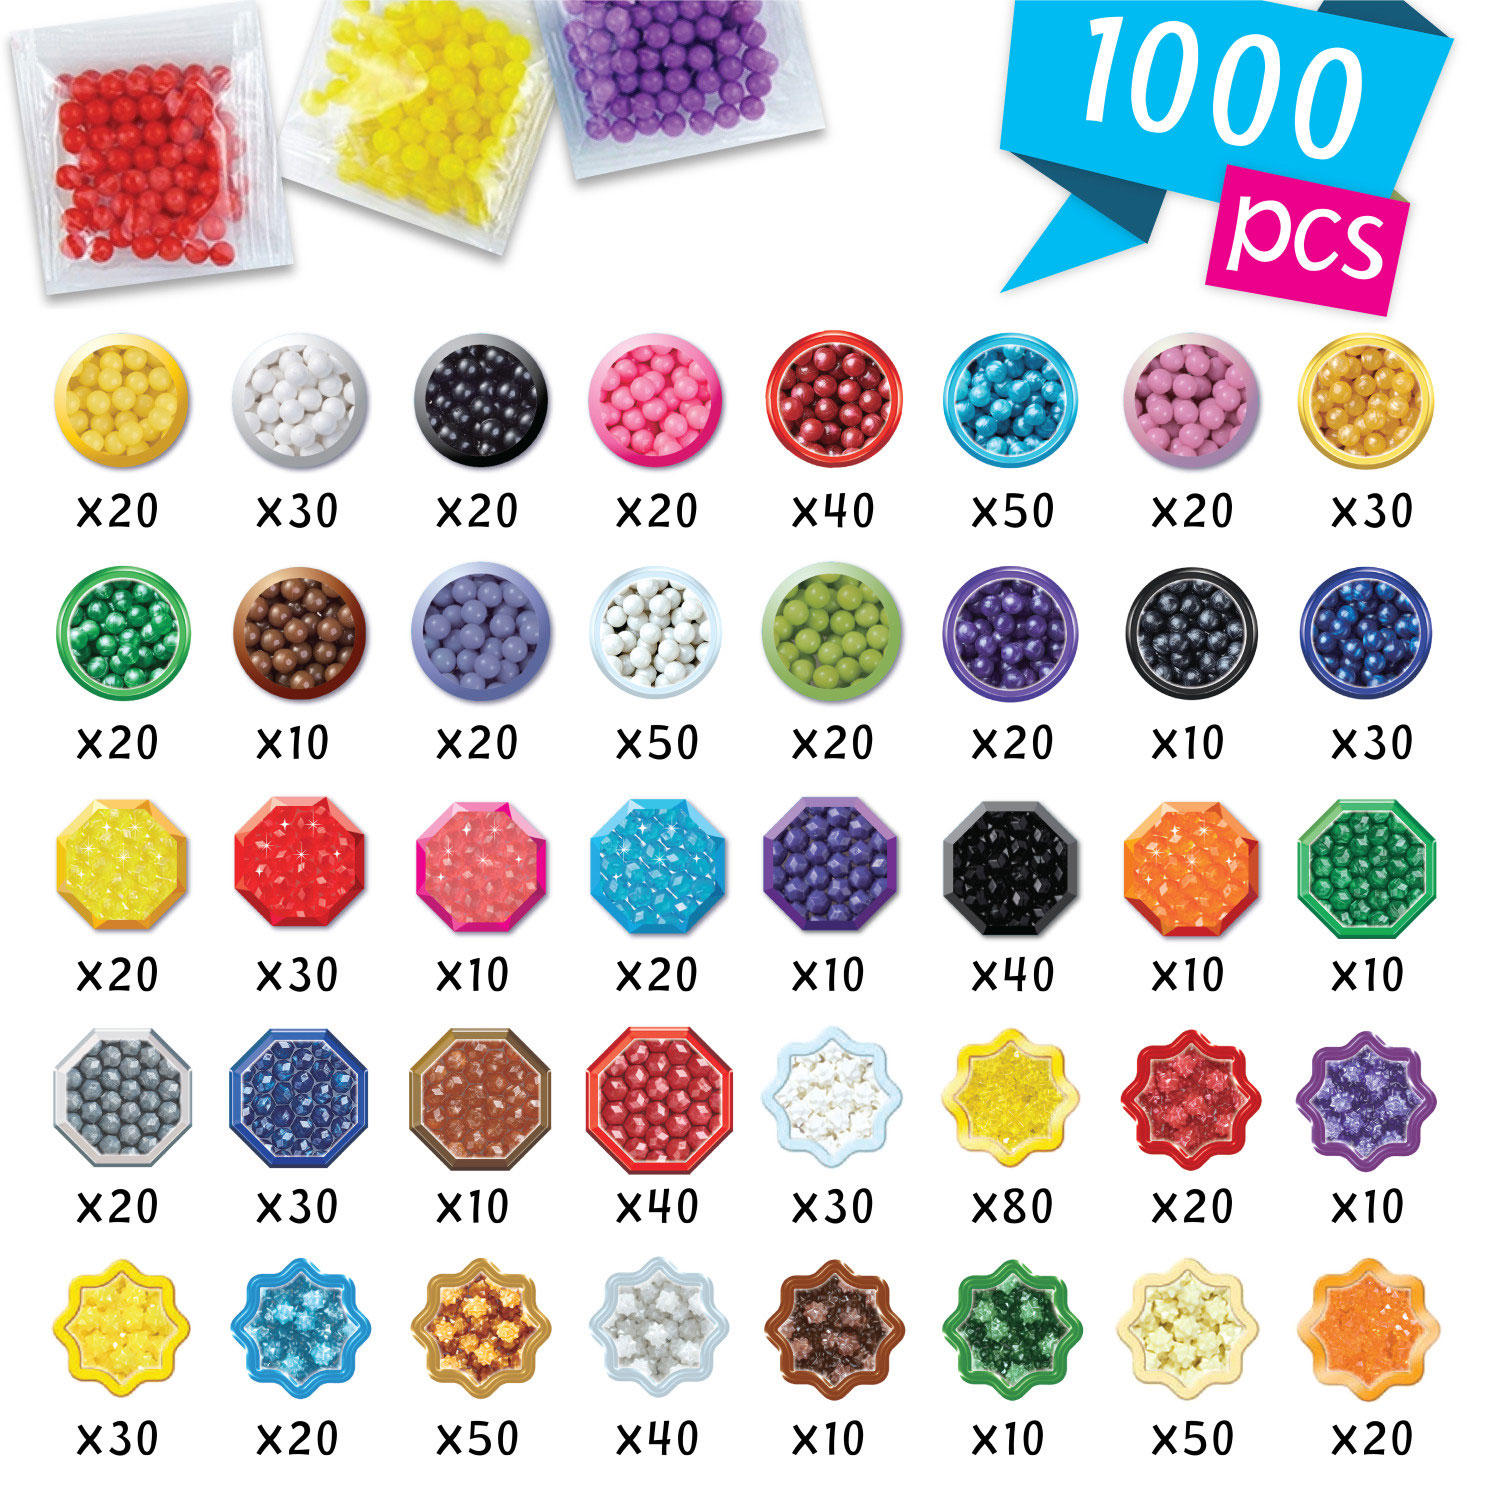 Aquabeads - Deluxe Craft Backpack (31993)